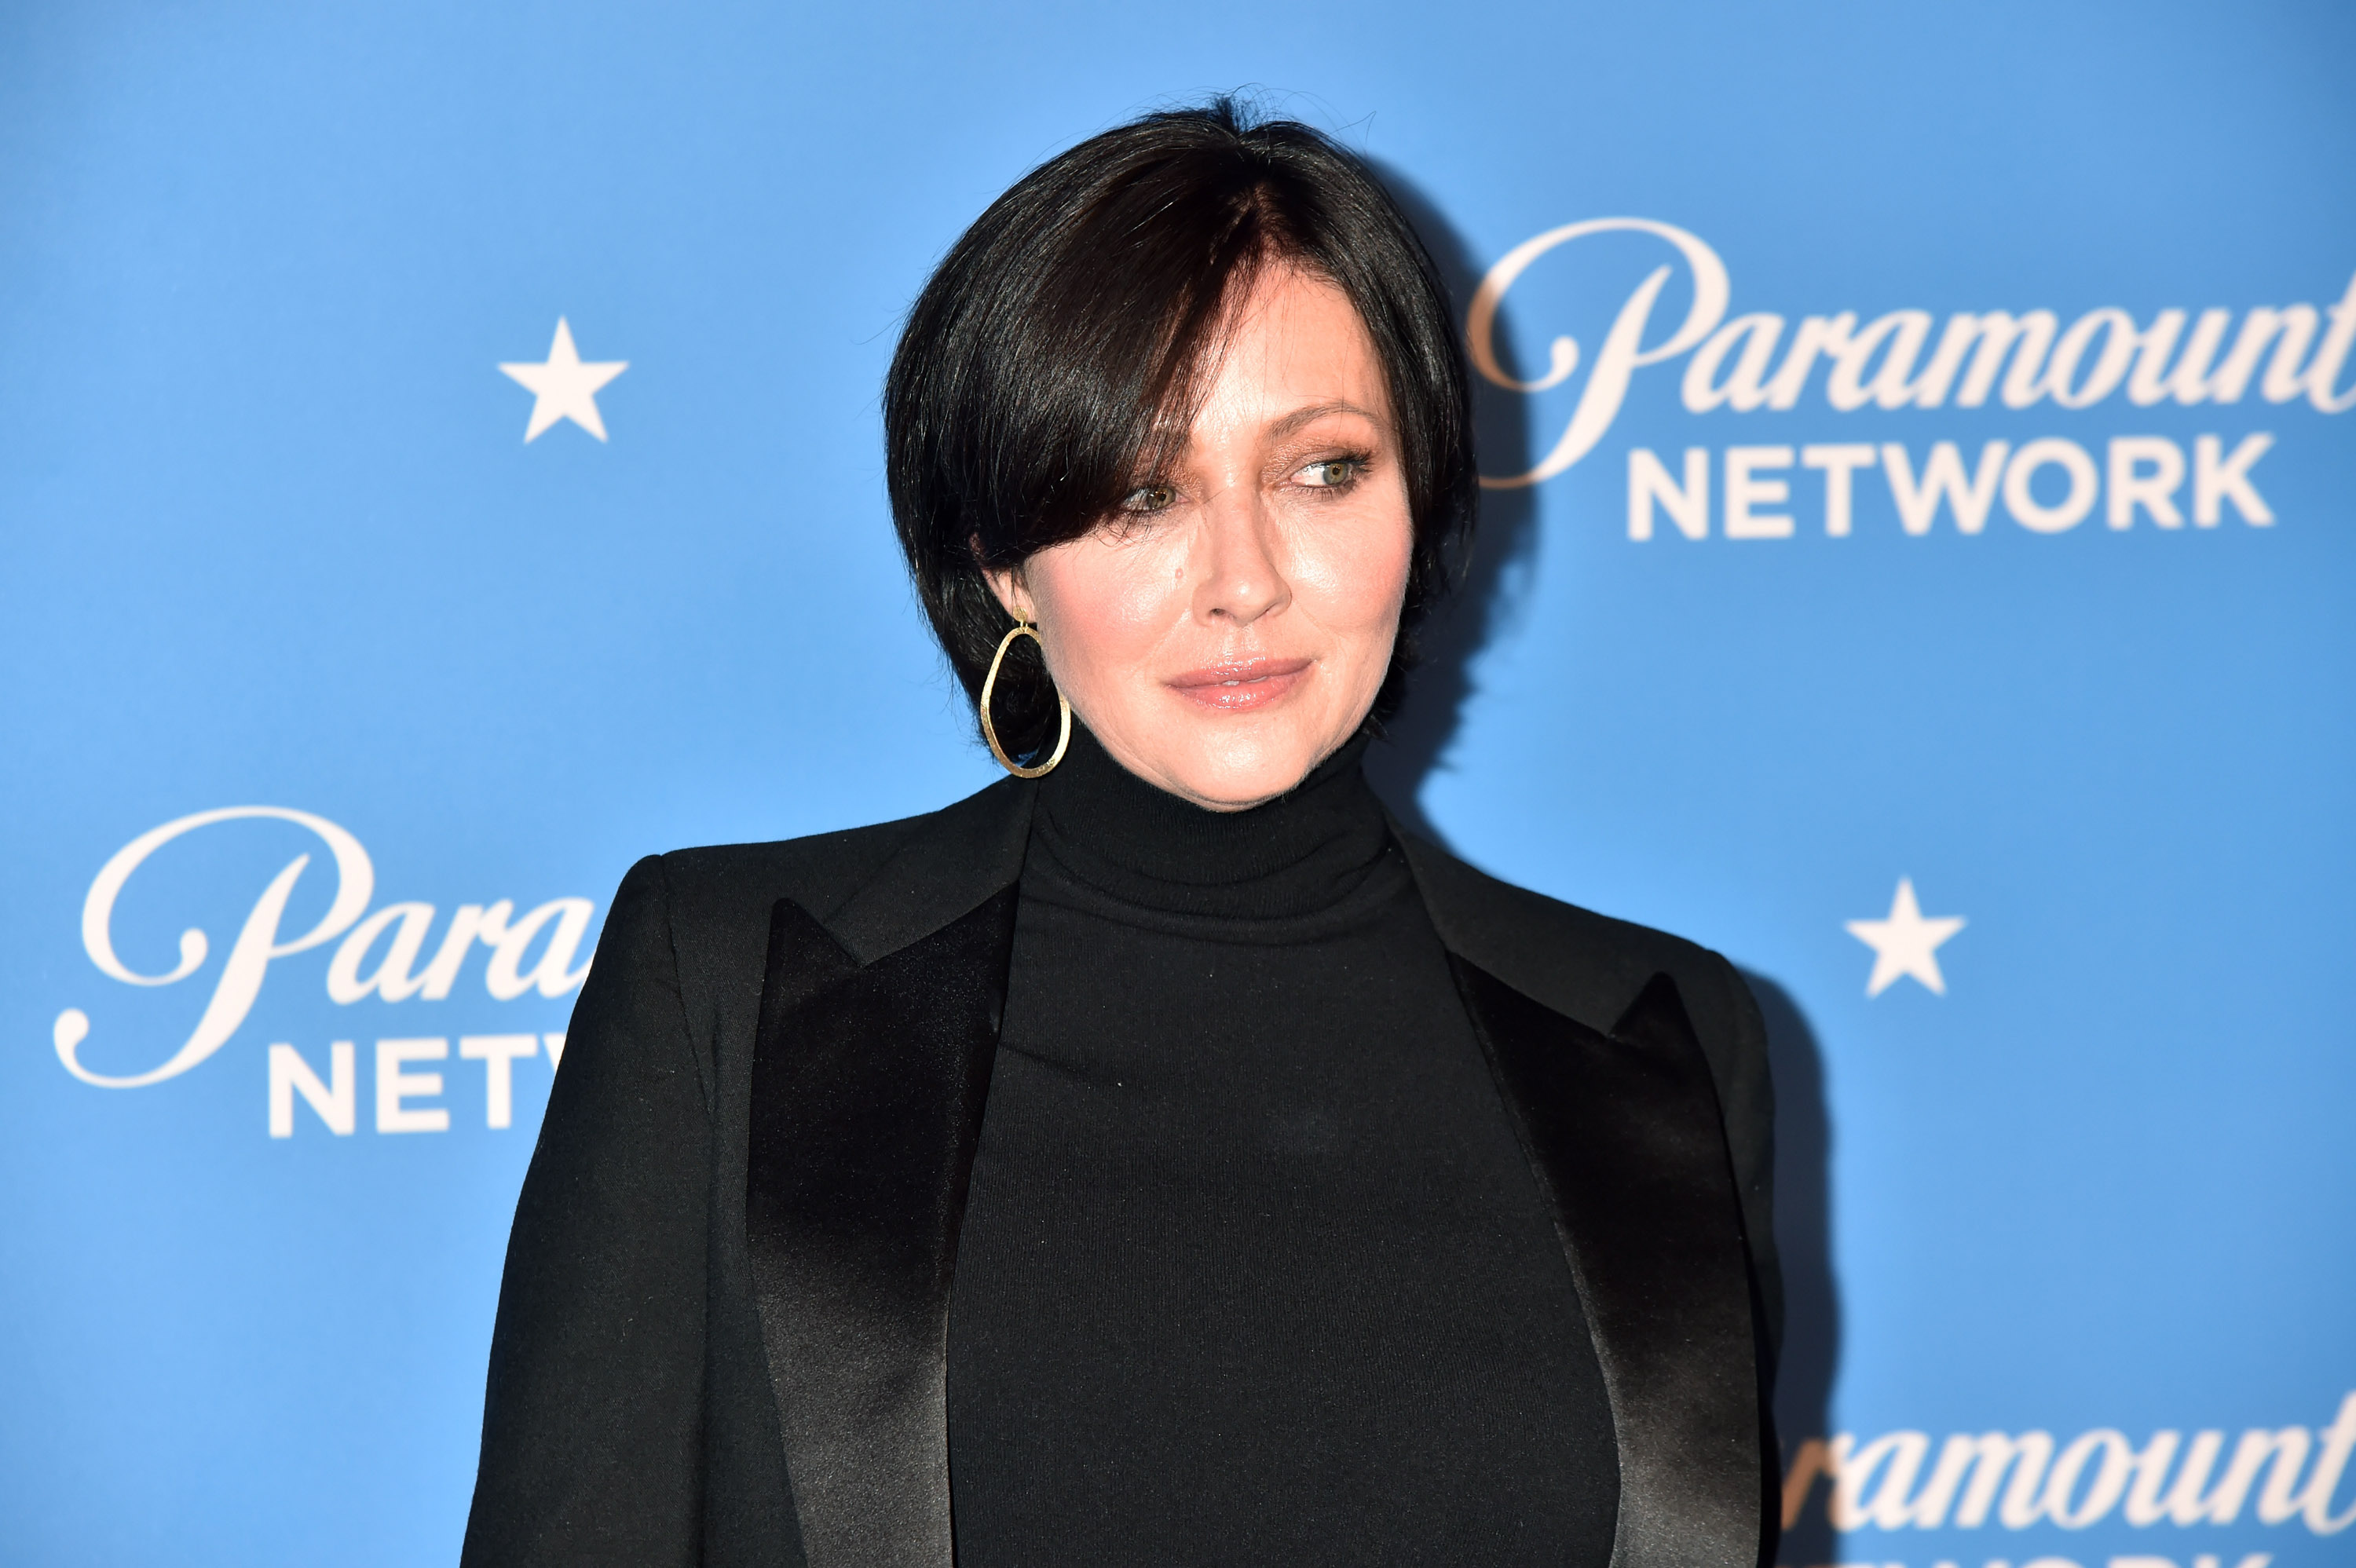 Shannen Doherty at the Paramount Network launch party in Los Angeles, California on January 18, 2018 | Source: Getty Images